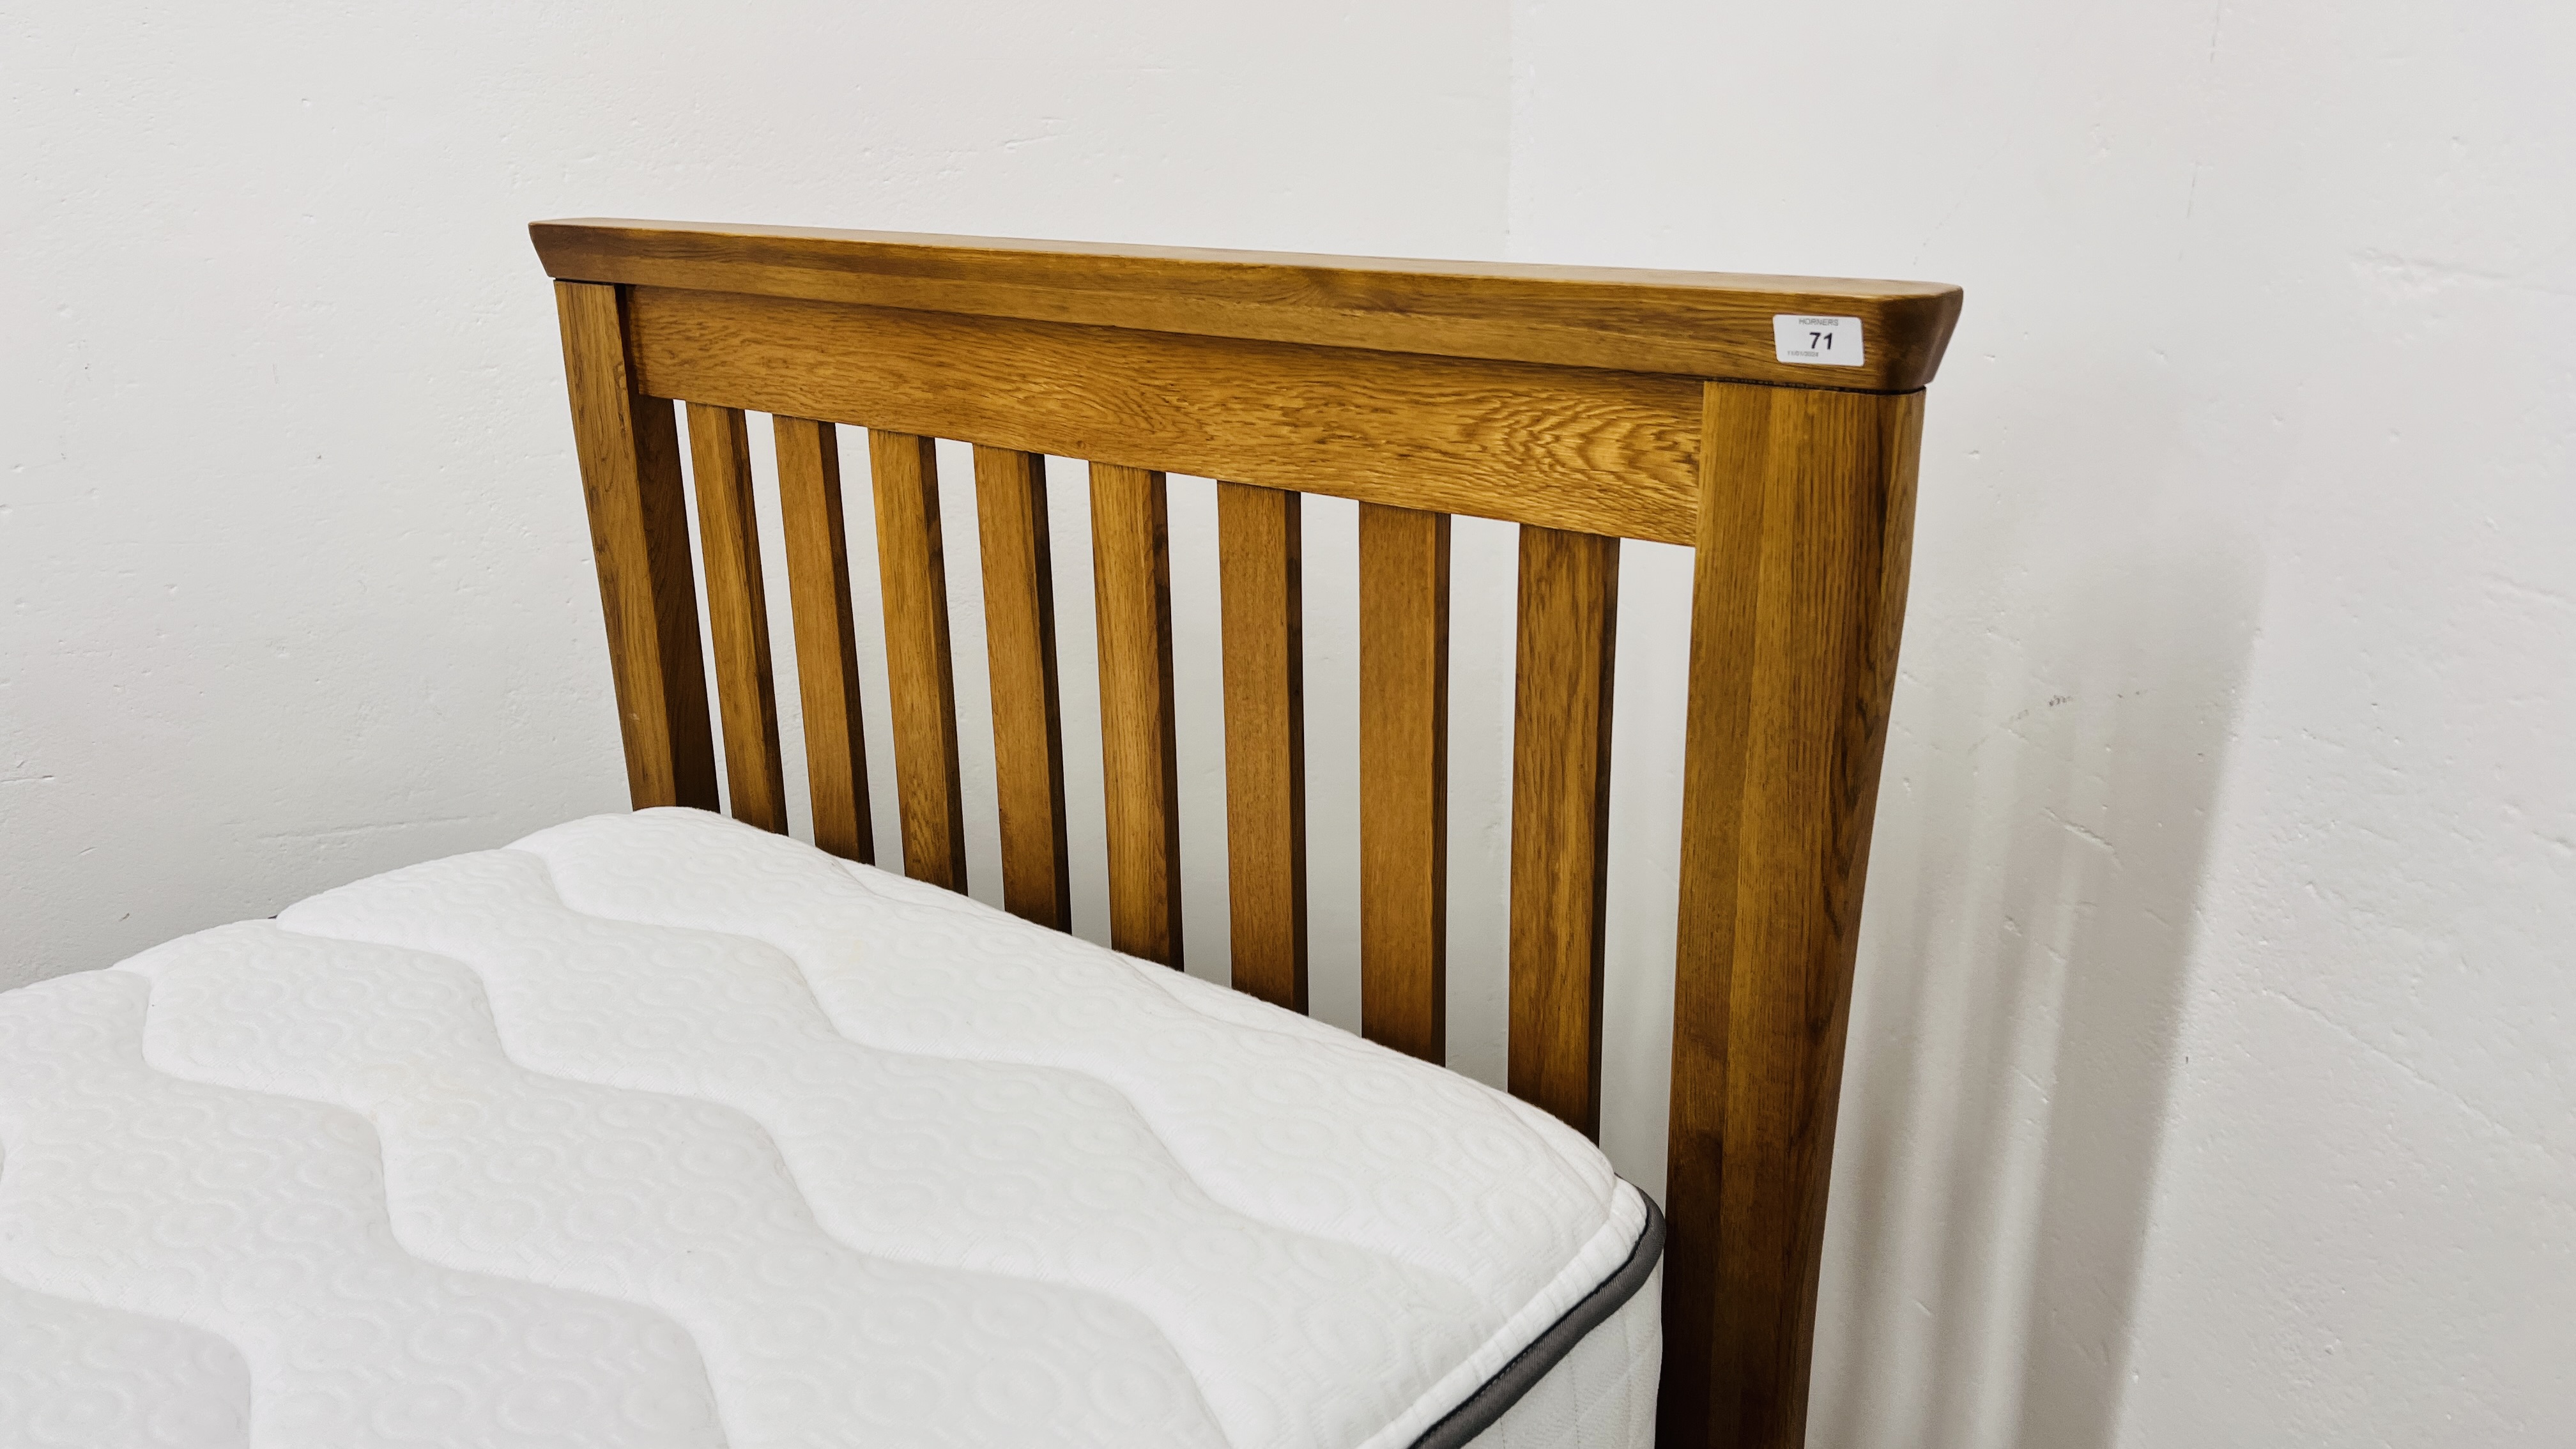 A GOOD QUALITY SOLID OAK SINGLE BED FRAME WITH SILENTNIGHT MIRROR POCKET 800 MEMORY MATTRESS. - Image 5 of 7